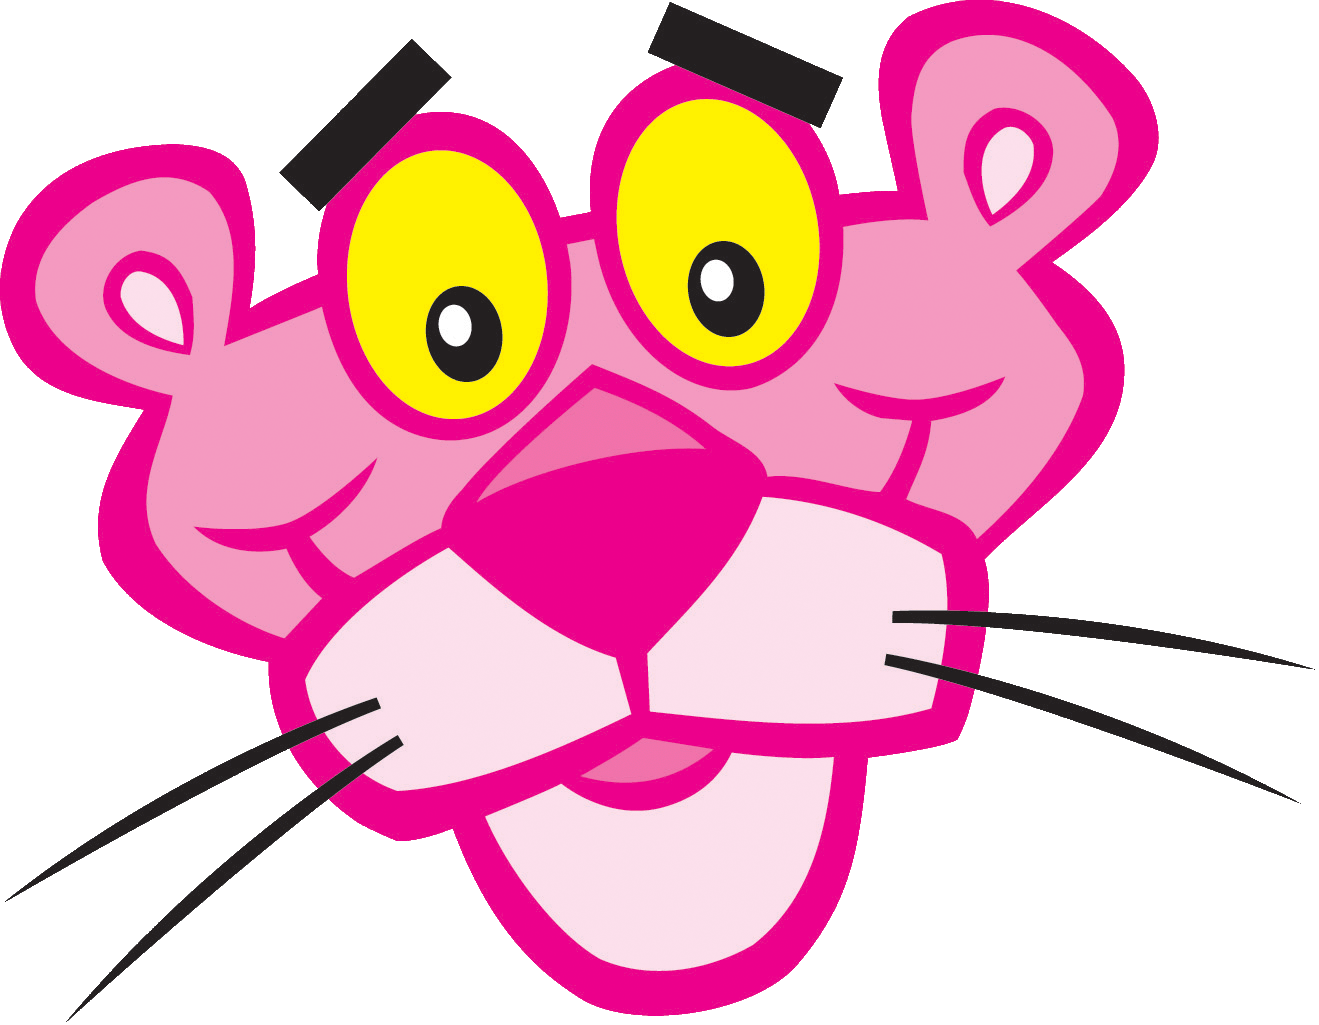 Pink Panther screenshots, images and pictures - Giant Bomb